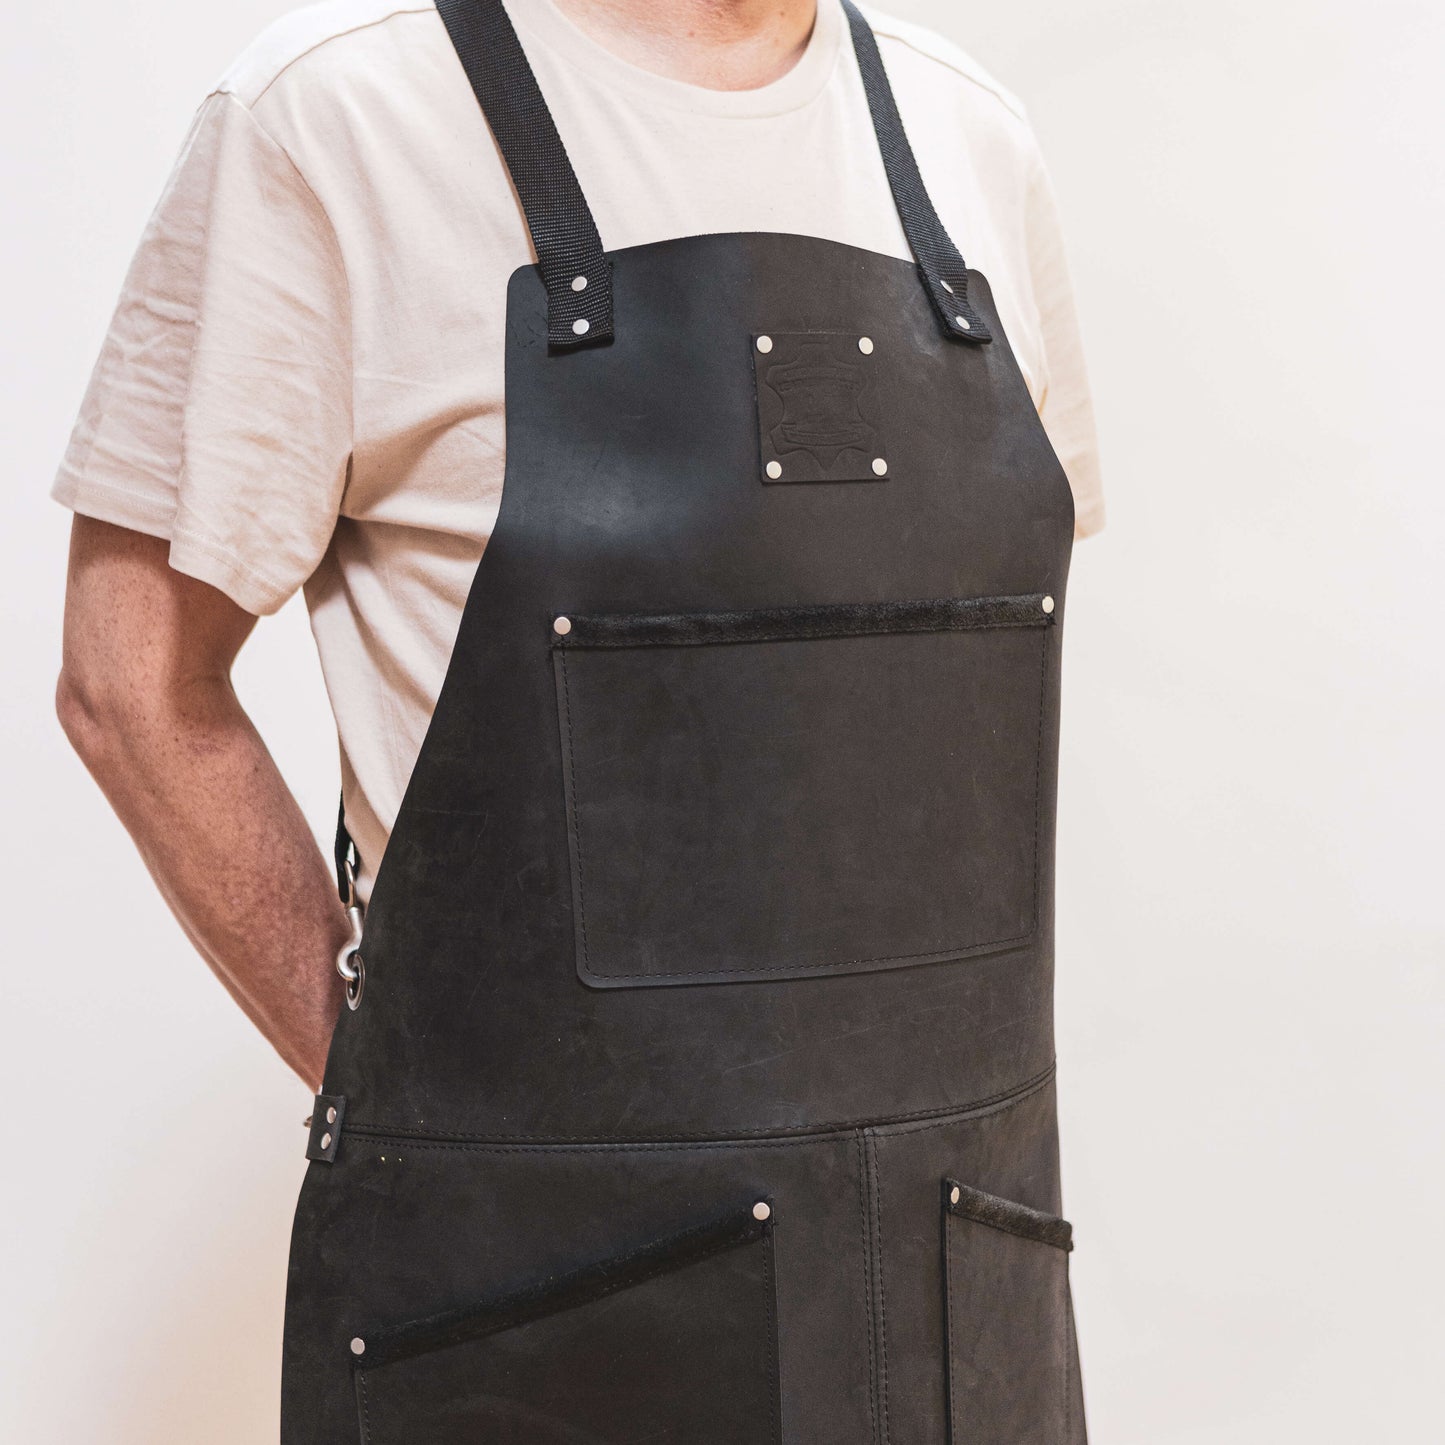 A joiner wearing a dark leather apron with straps over a beige t-shirt, against a light background. The Durham Leatherworker apron covers from chest to knees, displaying multiple pockets and silver rivets.